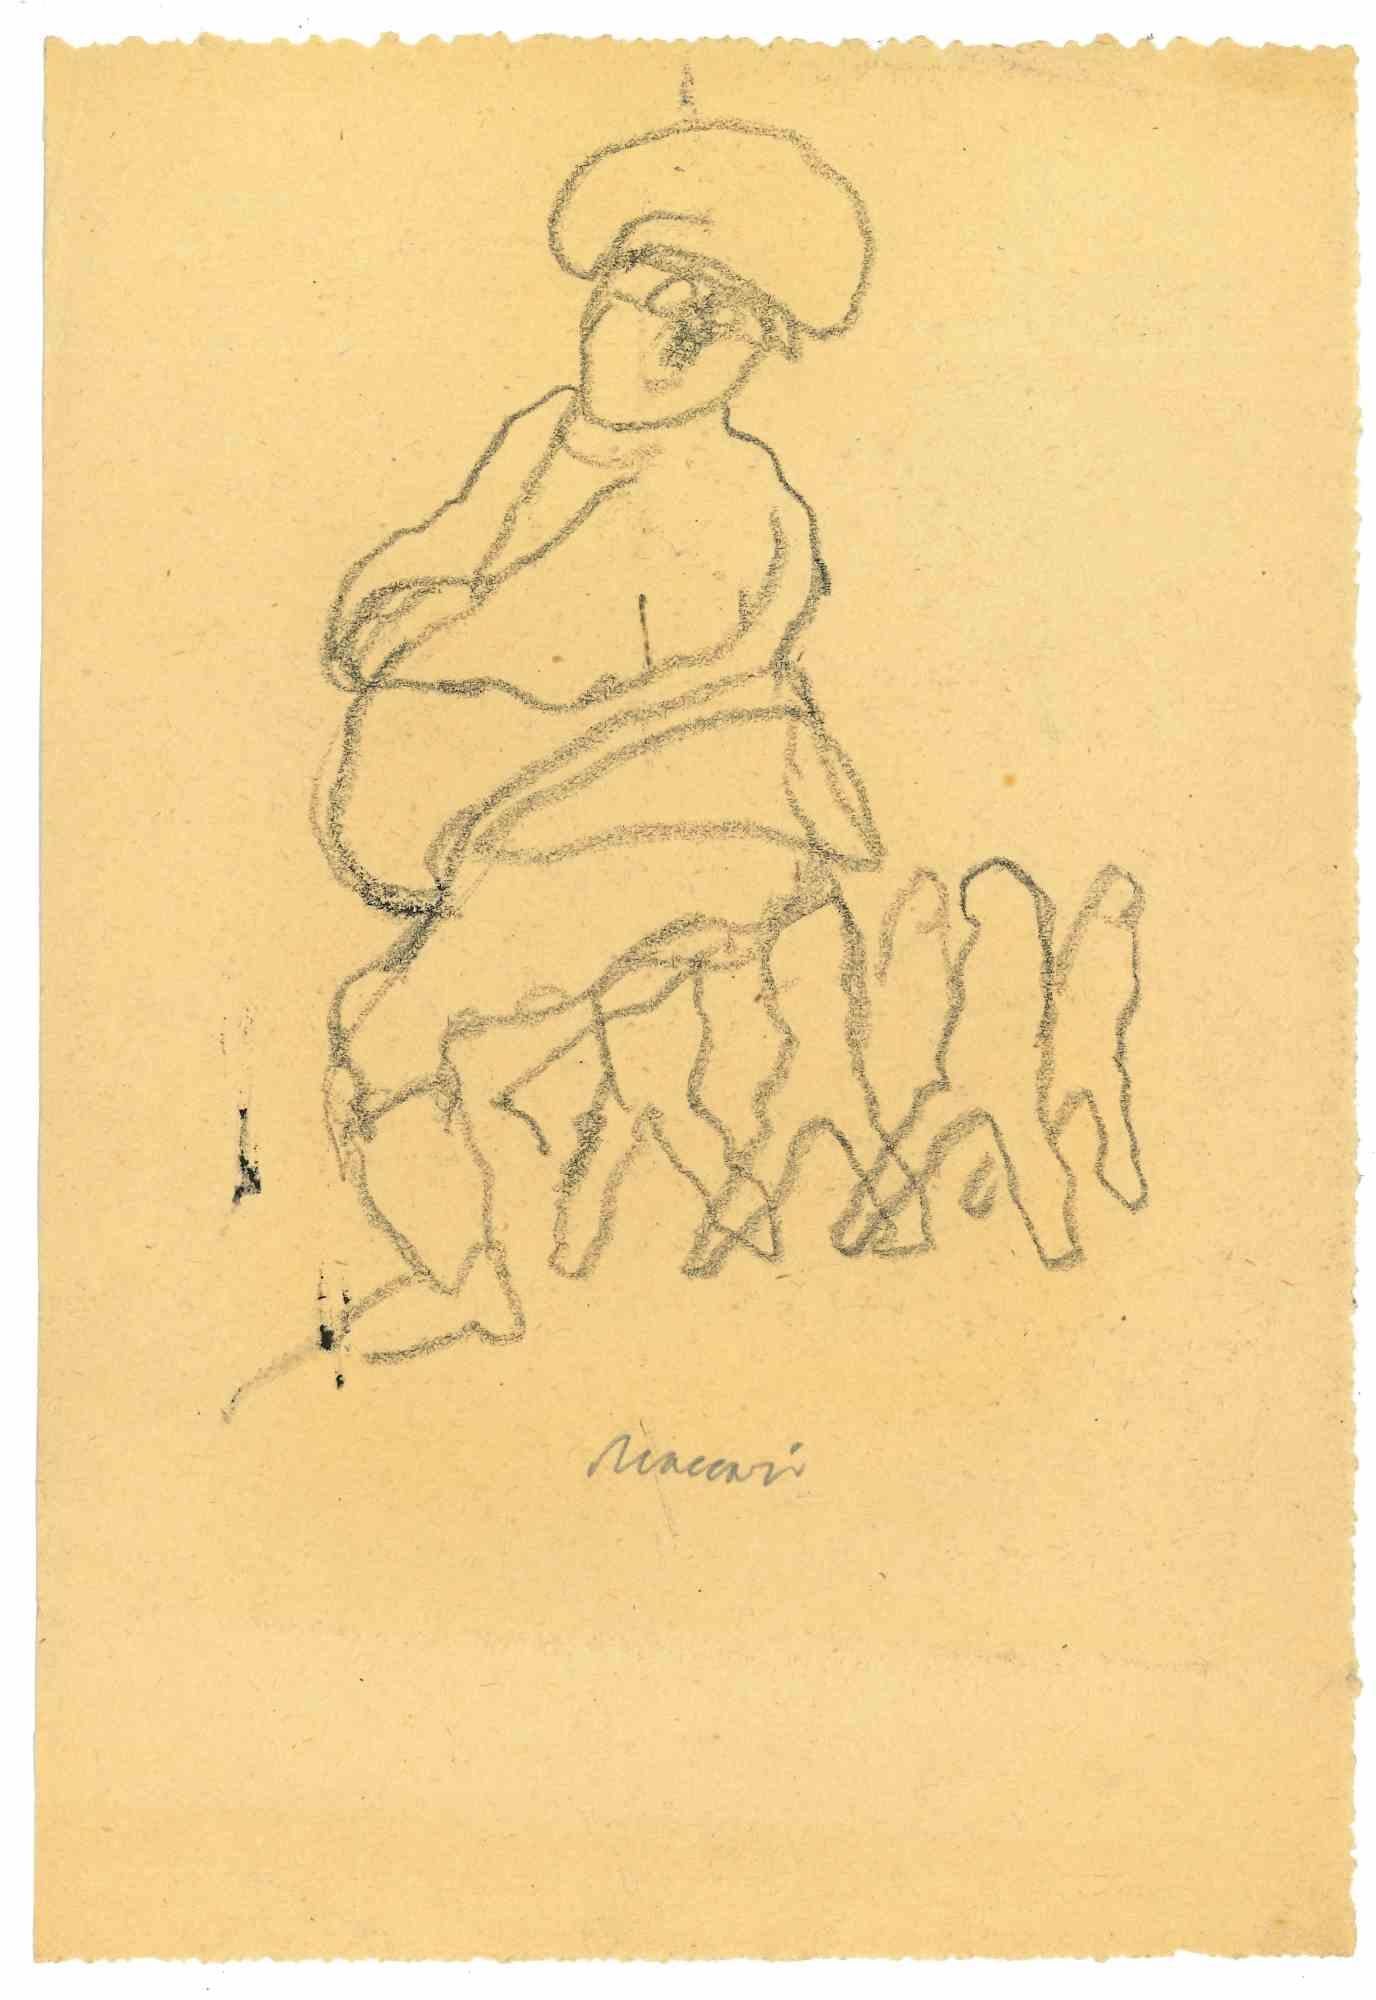 The General is a Pen Drawing realized by Mino Maccari  (1924-1989) in the 1960s.

Hand-signed on the lower.

Good condition.

Mino Maccari (Siena, 1924-Rome, June 16, 1989) was an Italian writer, painter, engraver and journalist, winner of the